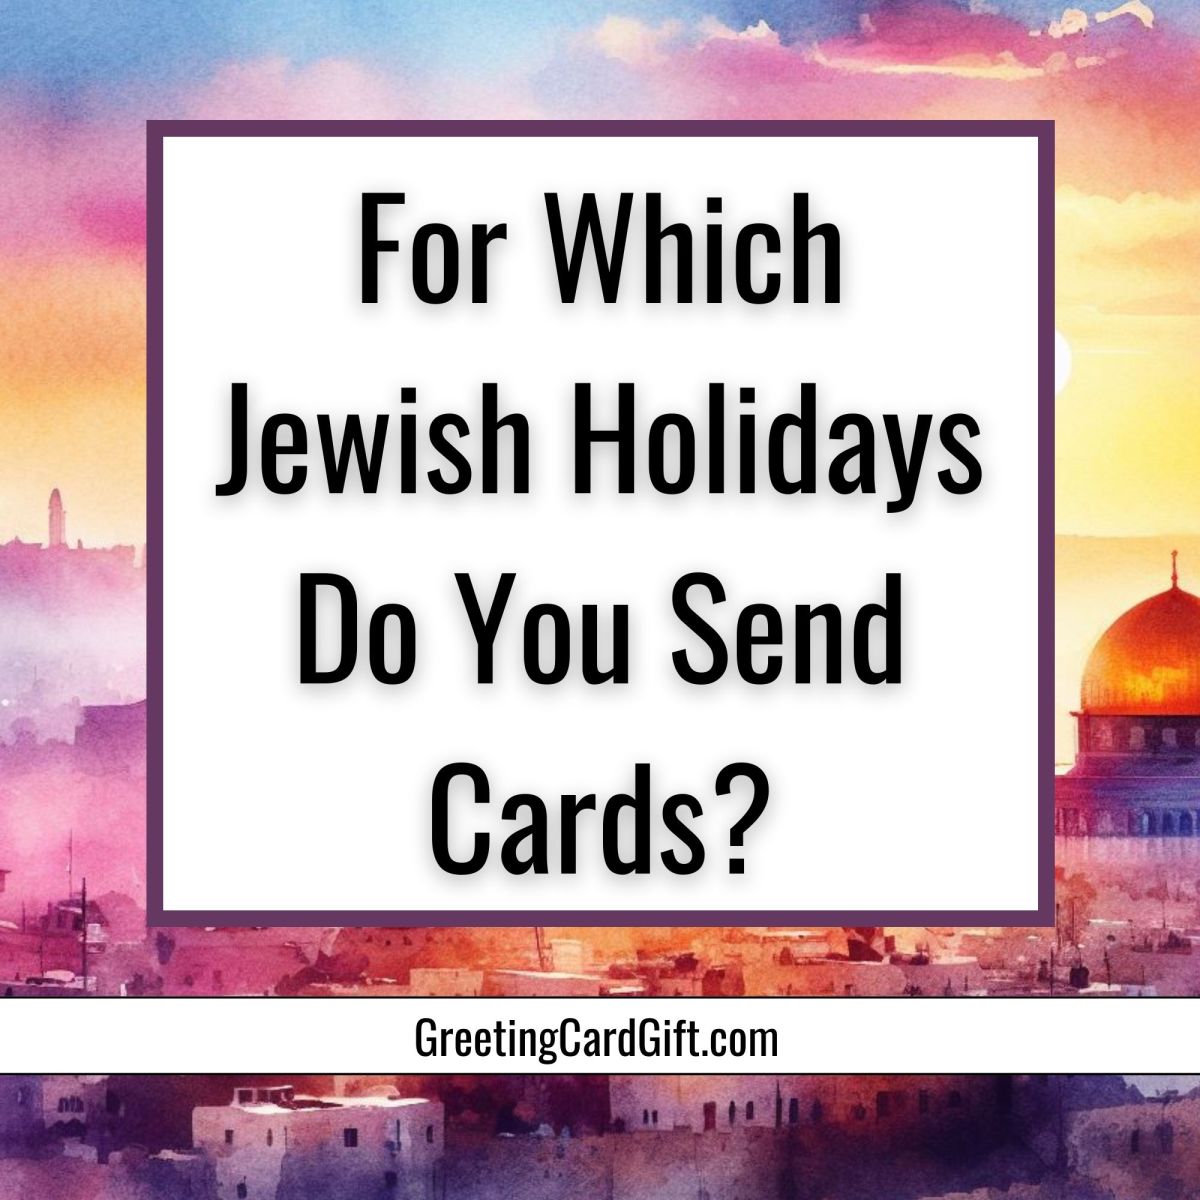 For Which Jewish Holidays Do You Send Cards?